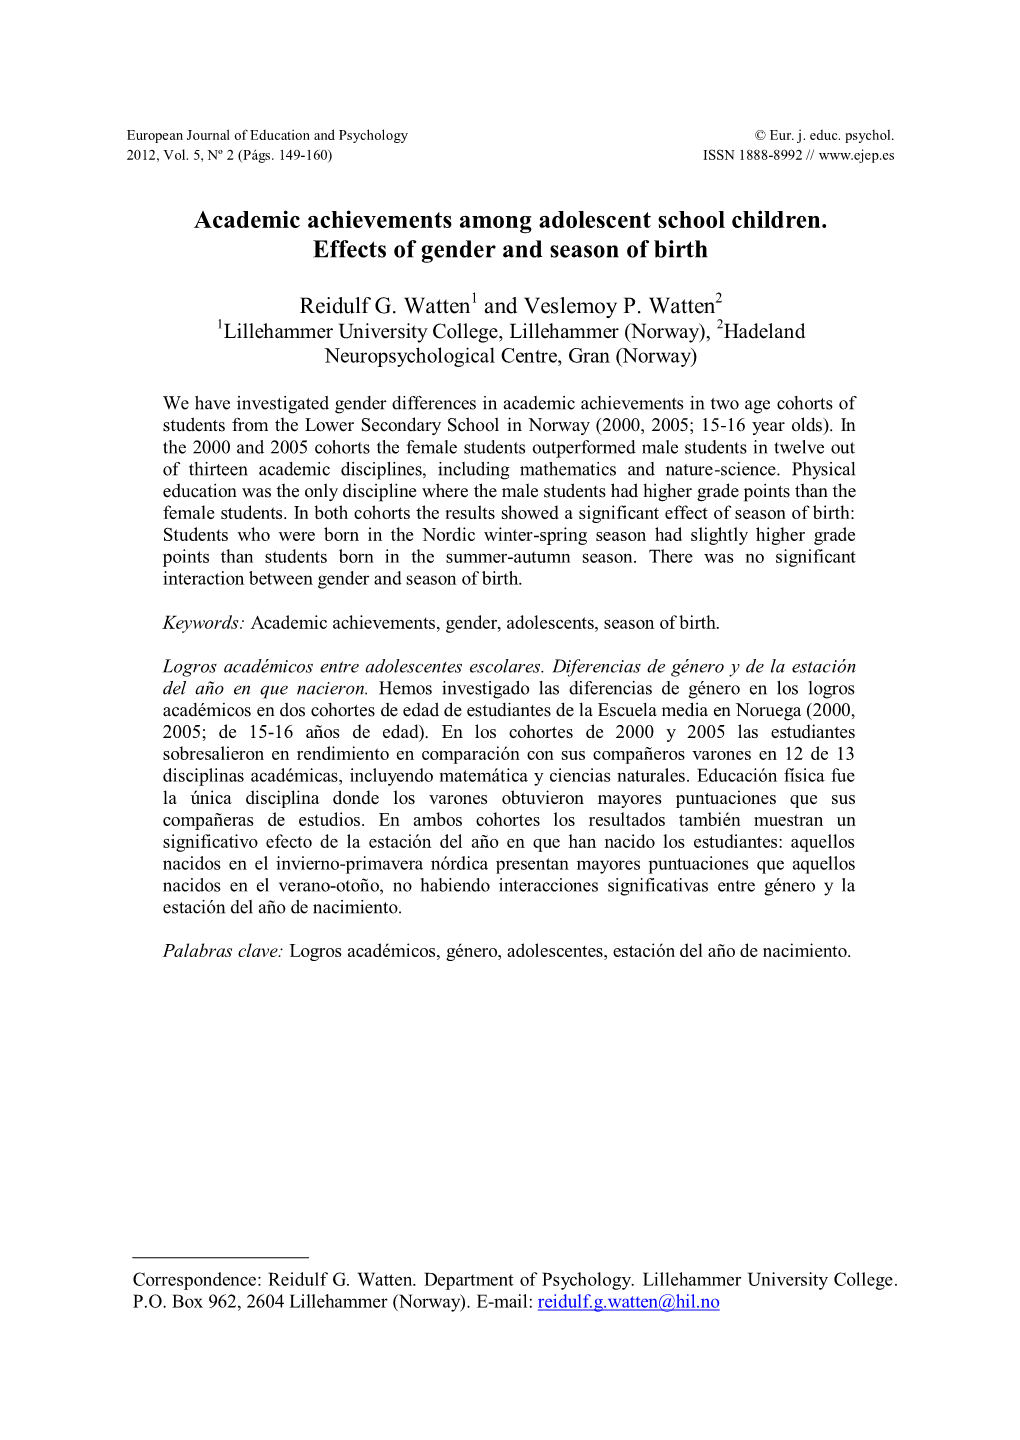 Academic Achievements Among Adolescent School Children. Effects of Gender and Season of Birth